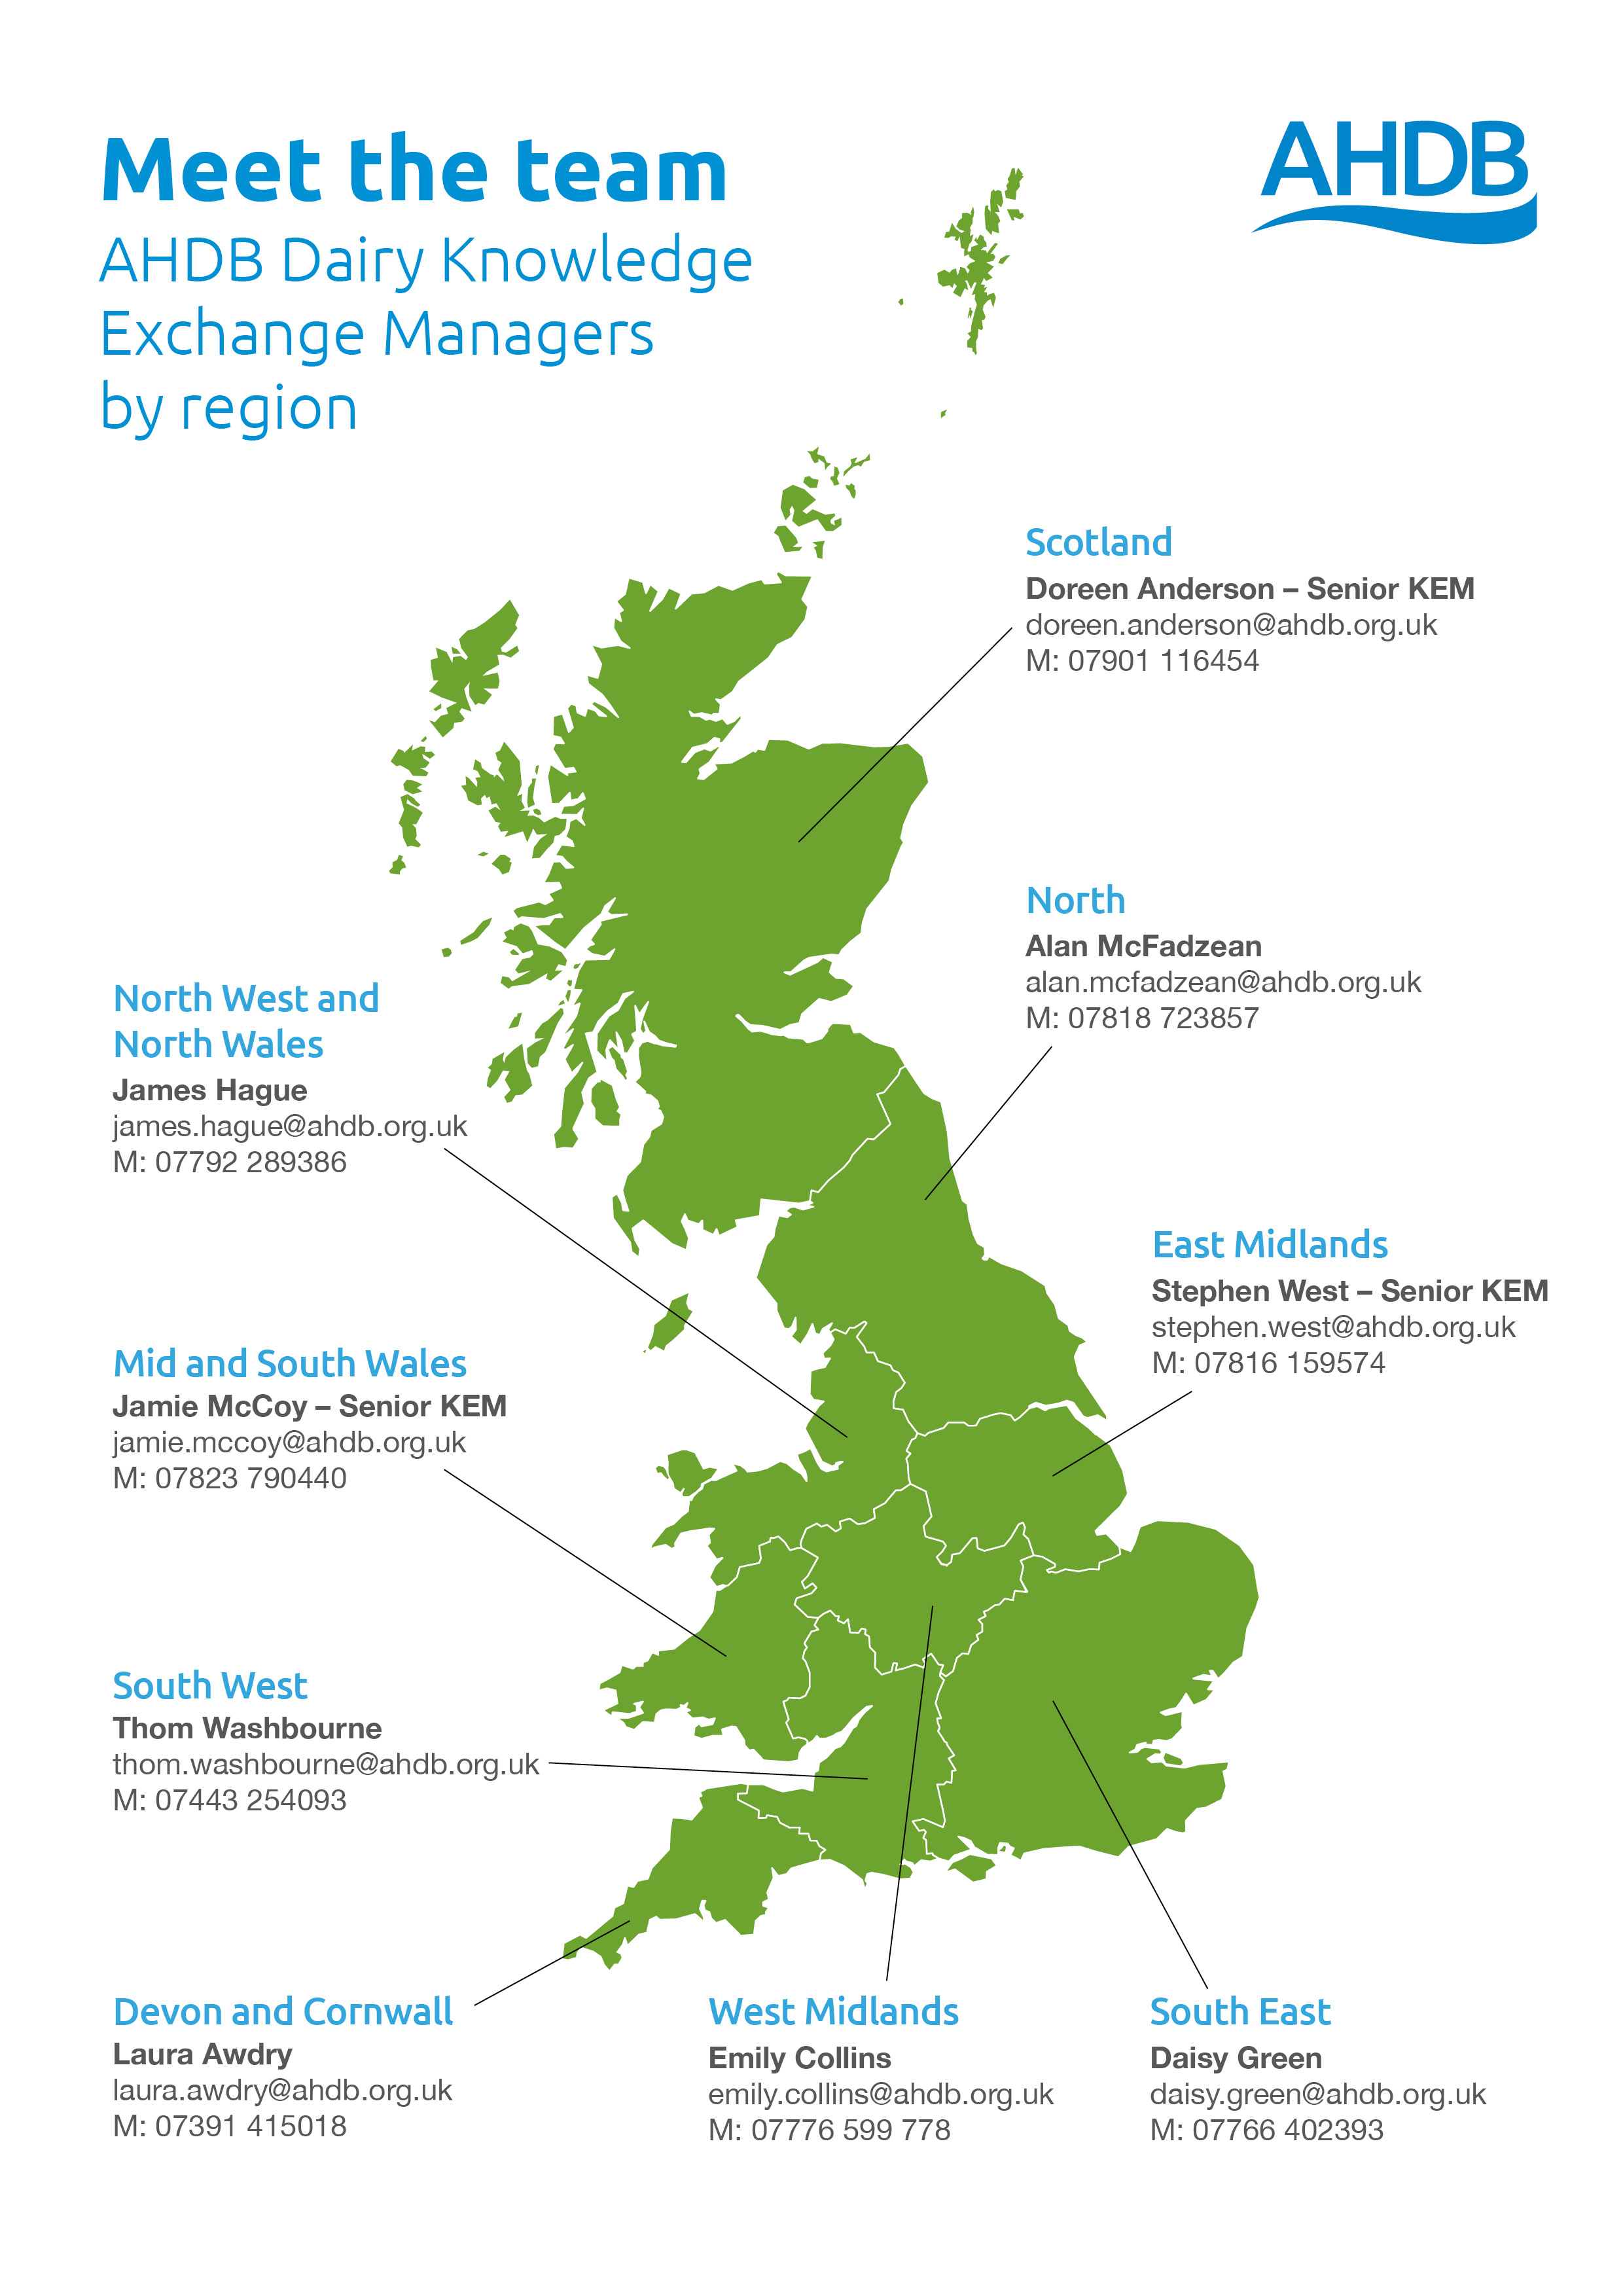  Map of the AHDB Dairy team by UK region.